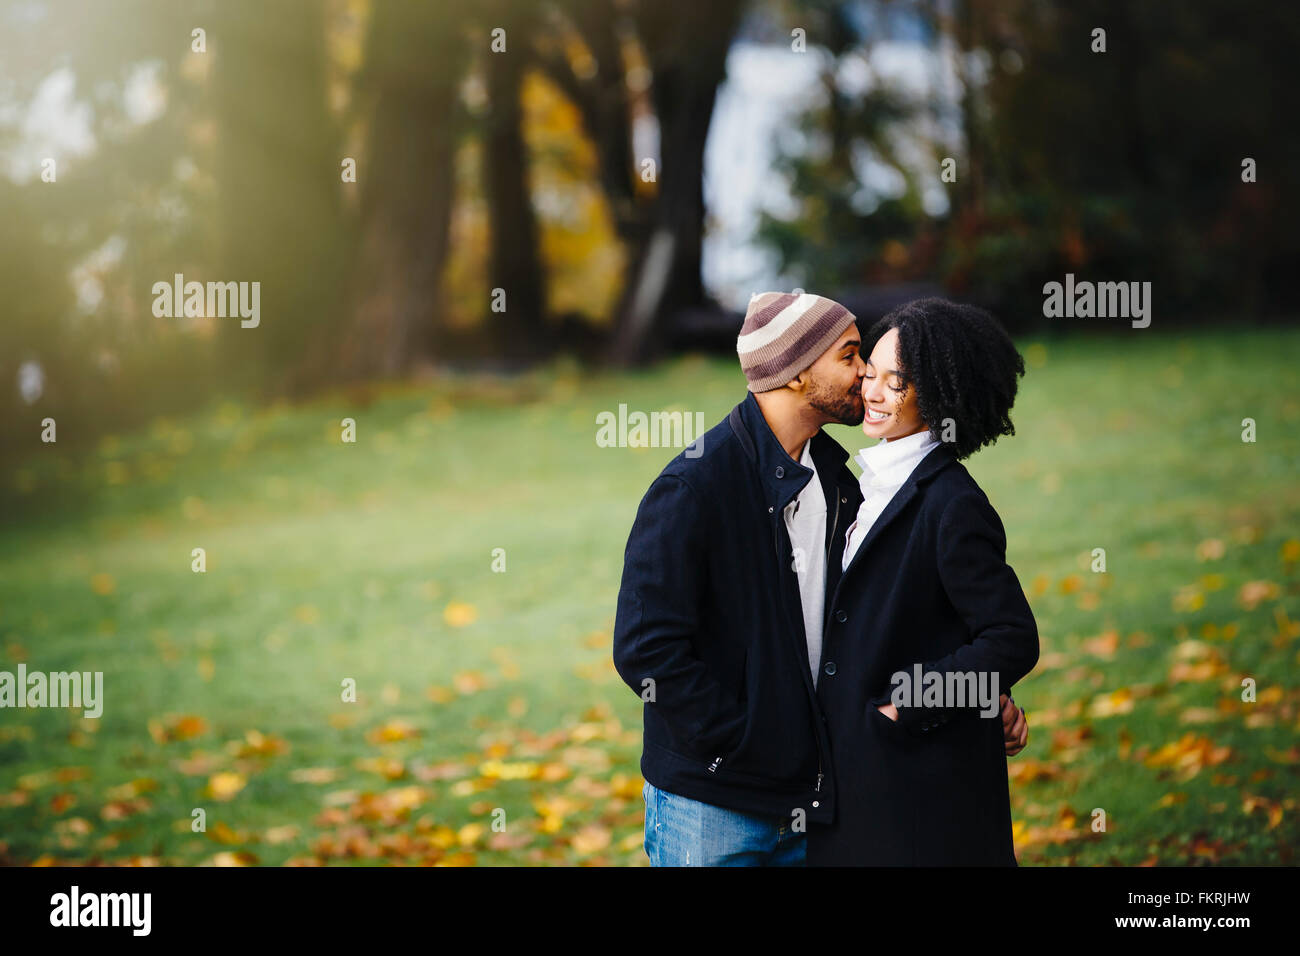 Couple kissing in park Stock Photo